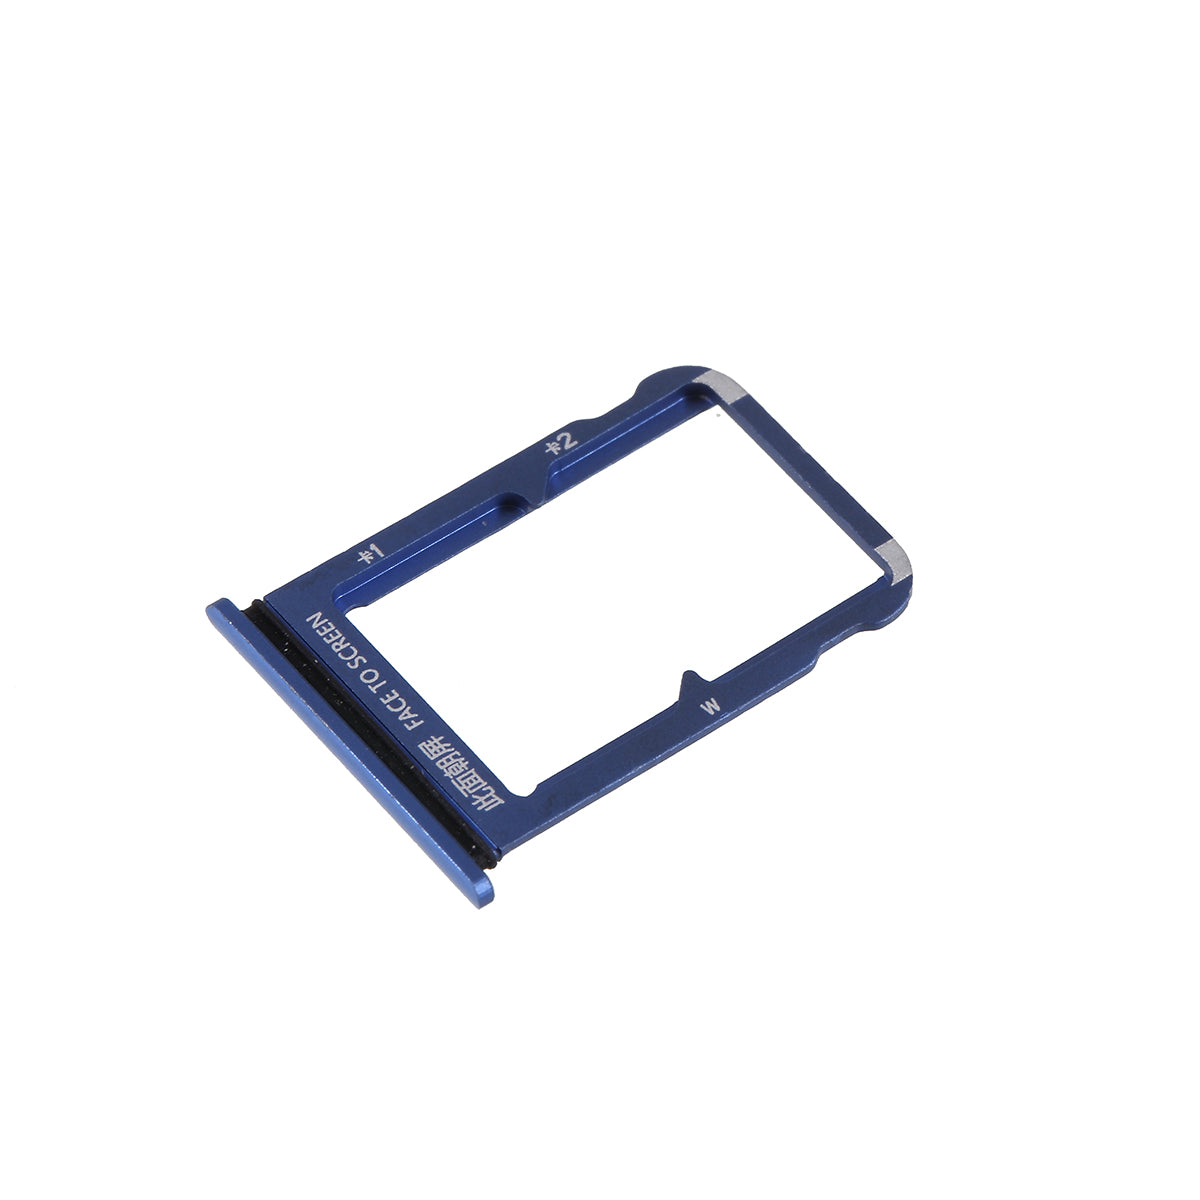 OEM Dual SIM Card Tray Holder Replace Part for Xiaomi Mi 9 - Blue